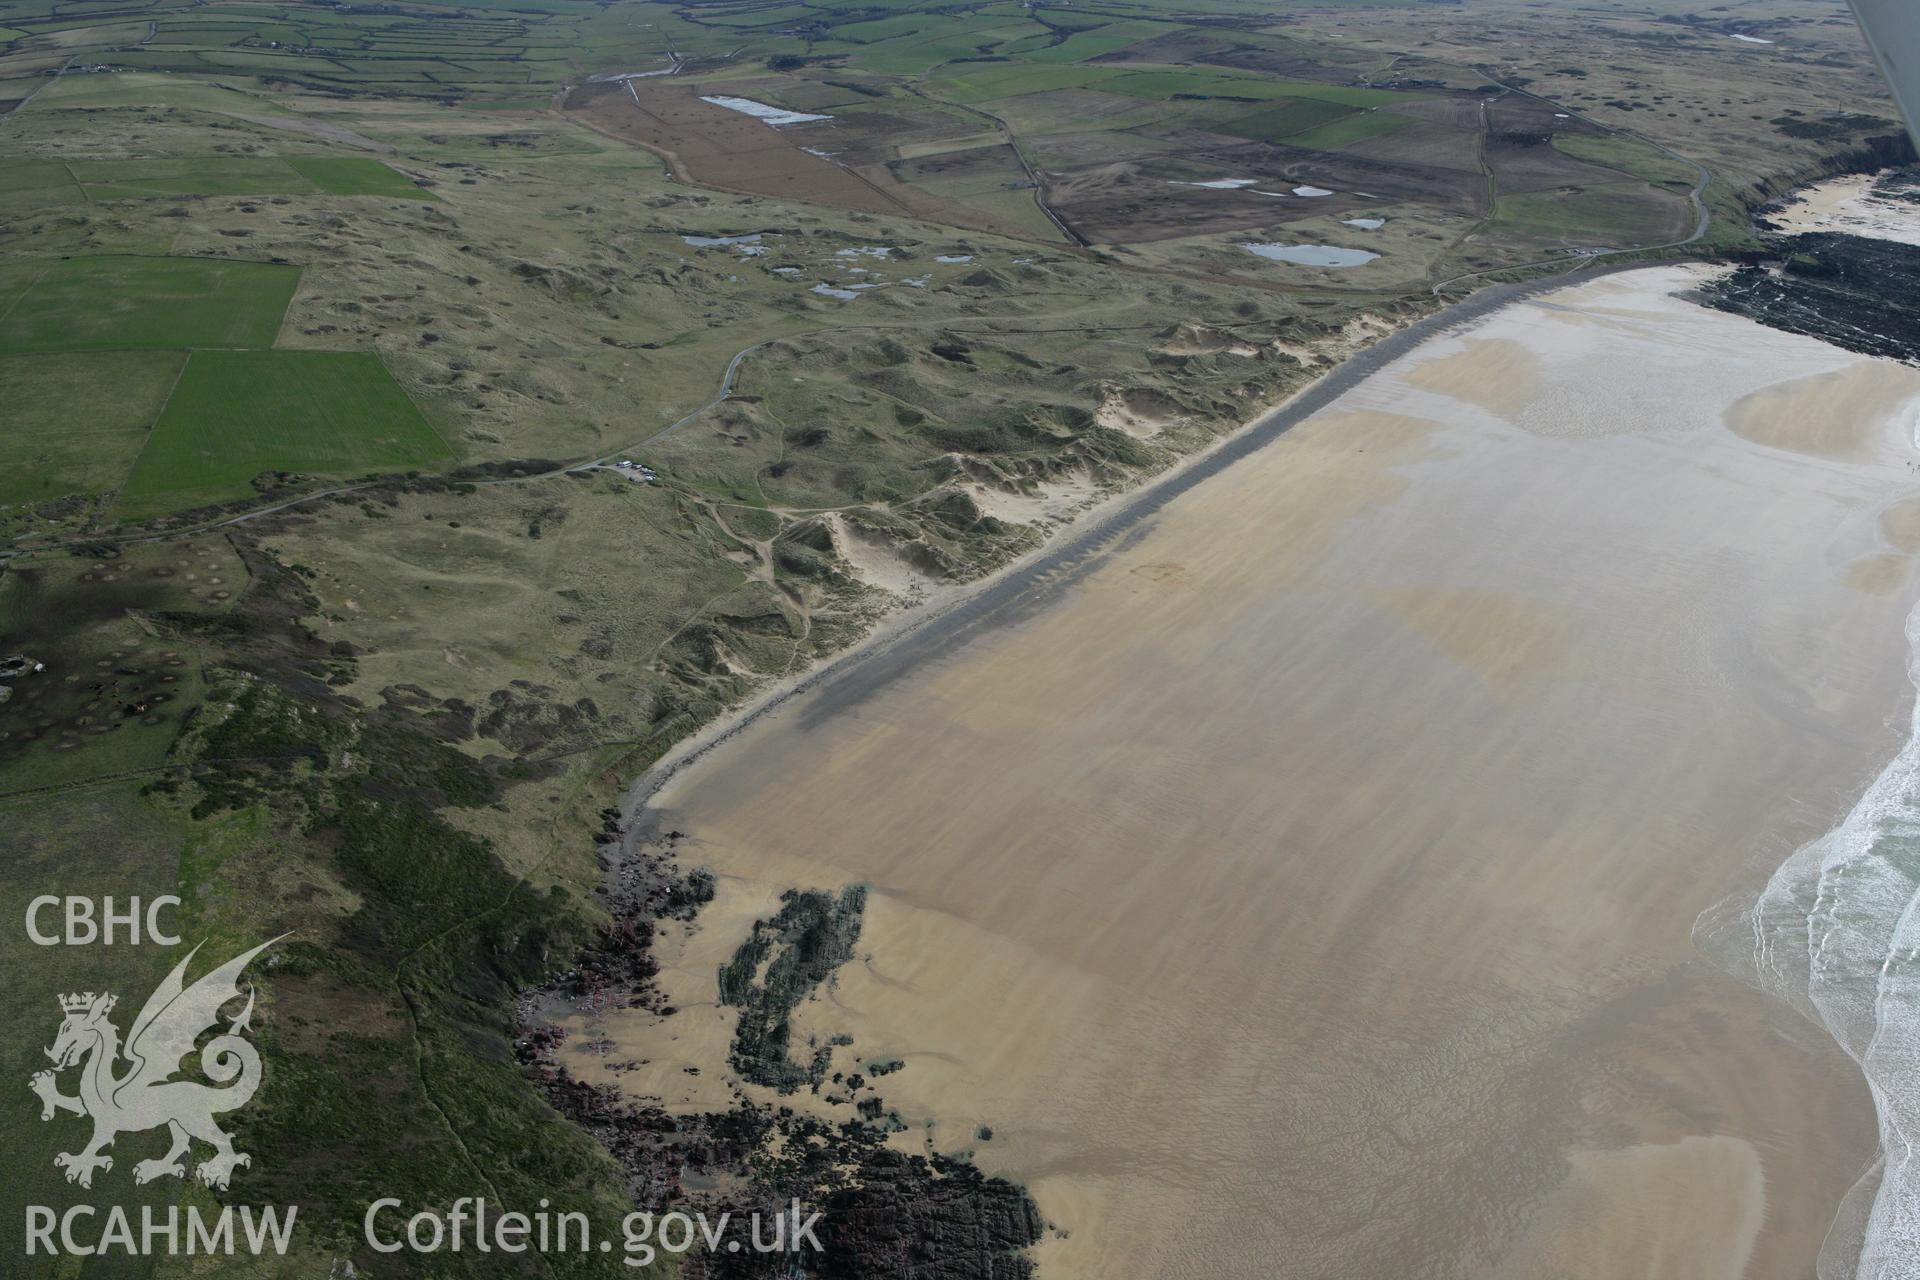 RCAHMW colour oblique aerial photograph of Freshwater West landscape. Taken on 02 March 2010 by Toby Driver